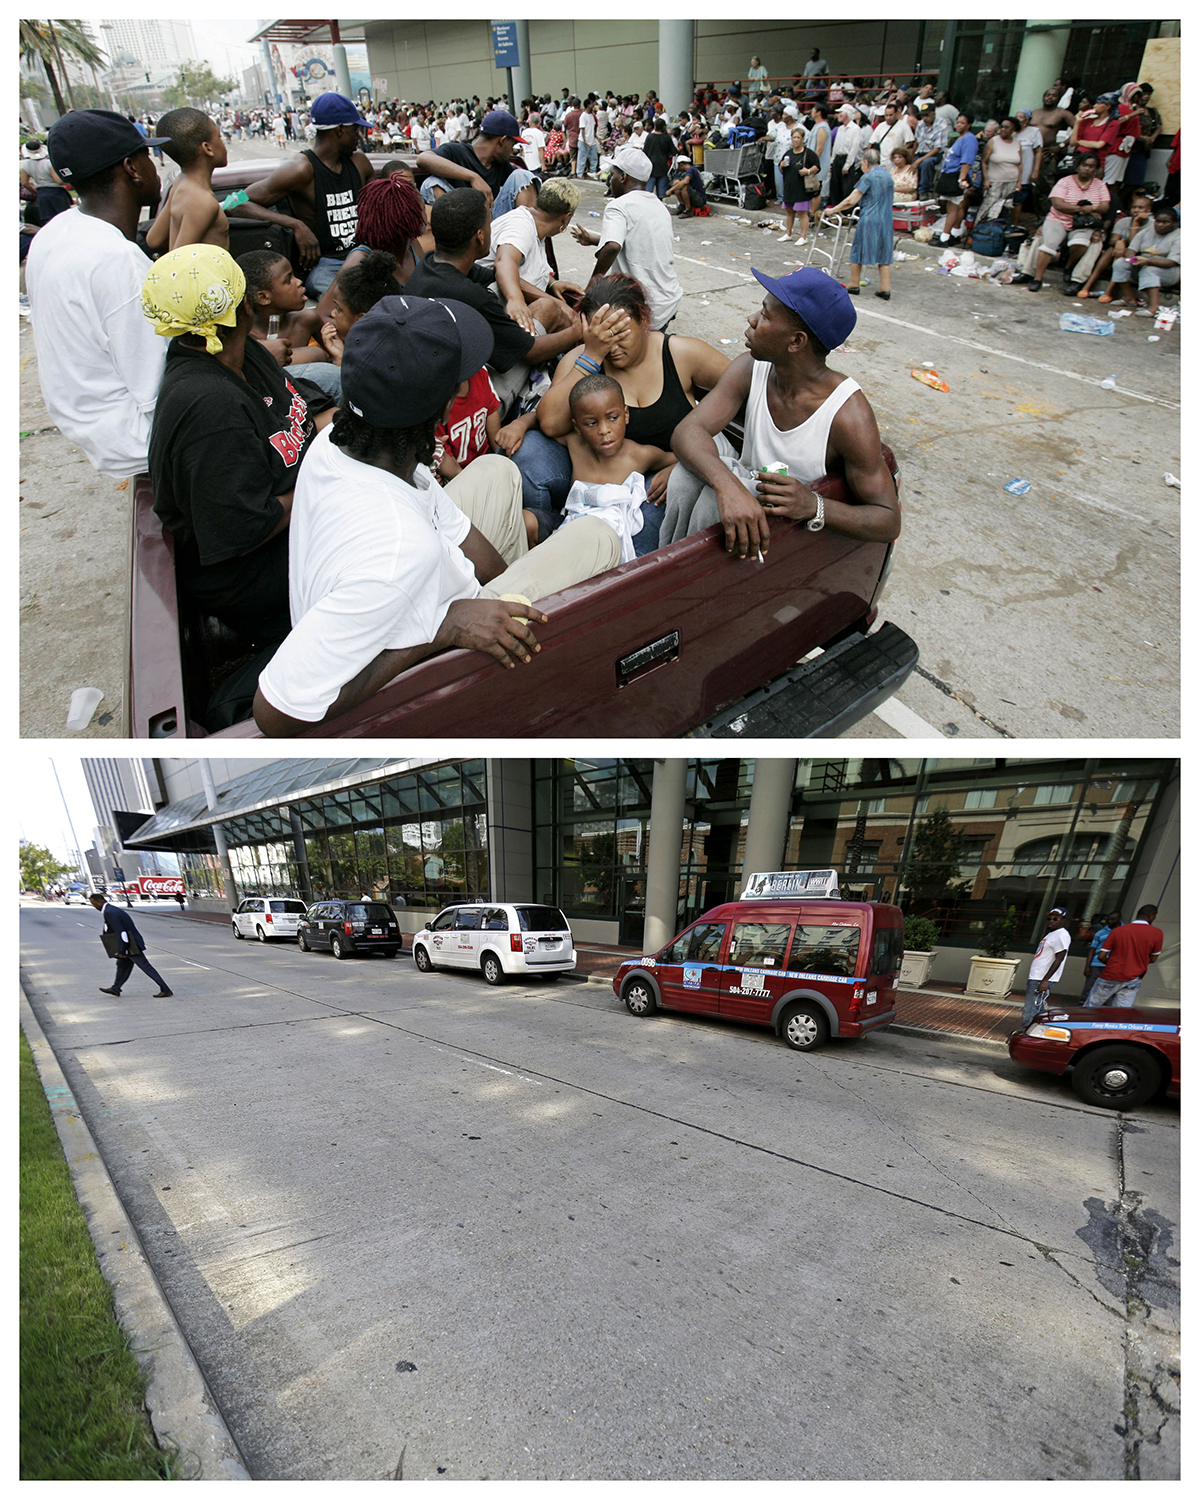 This combination of Sept. 1, 2005, and Aug. 14, 2015, photos shows flood victims in a pickup truck as hundreds of others wait for evacuation at the Ernest N. Morial Convention Center in New Orleans in the aftermath of Hurricane Katrina, and the same site a decade later. (Eric Gay, Gerald Herbert / Associated Press)